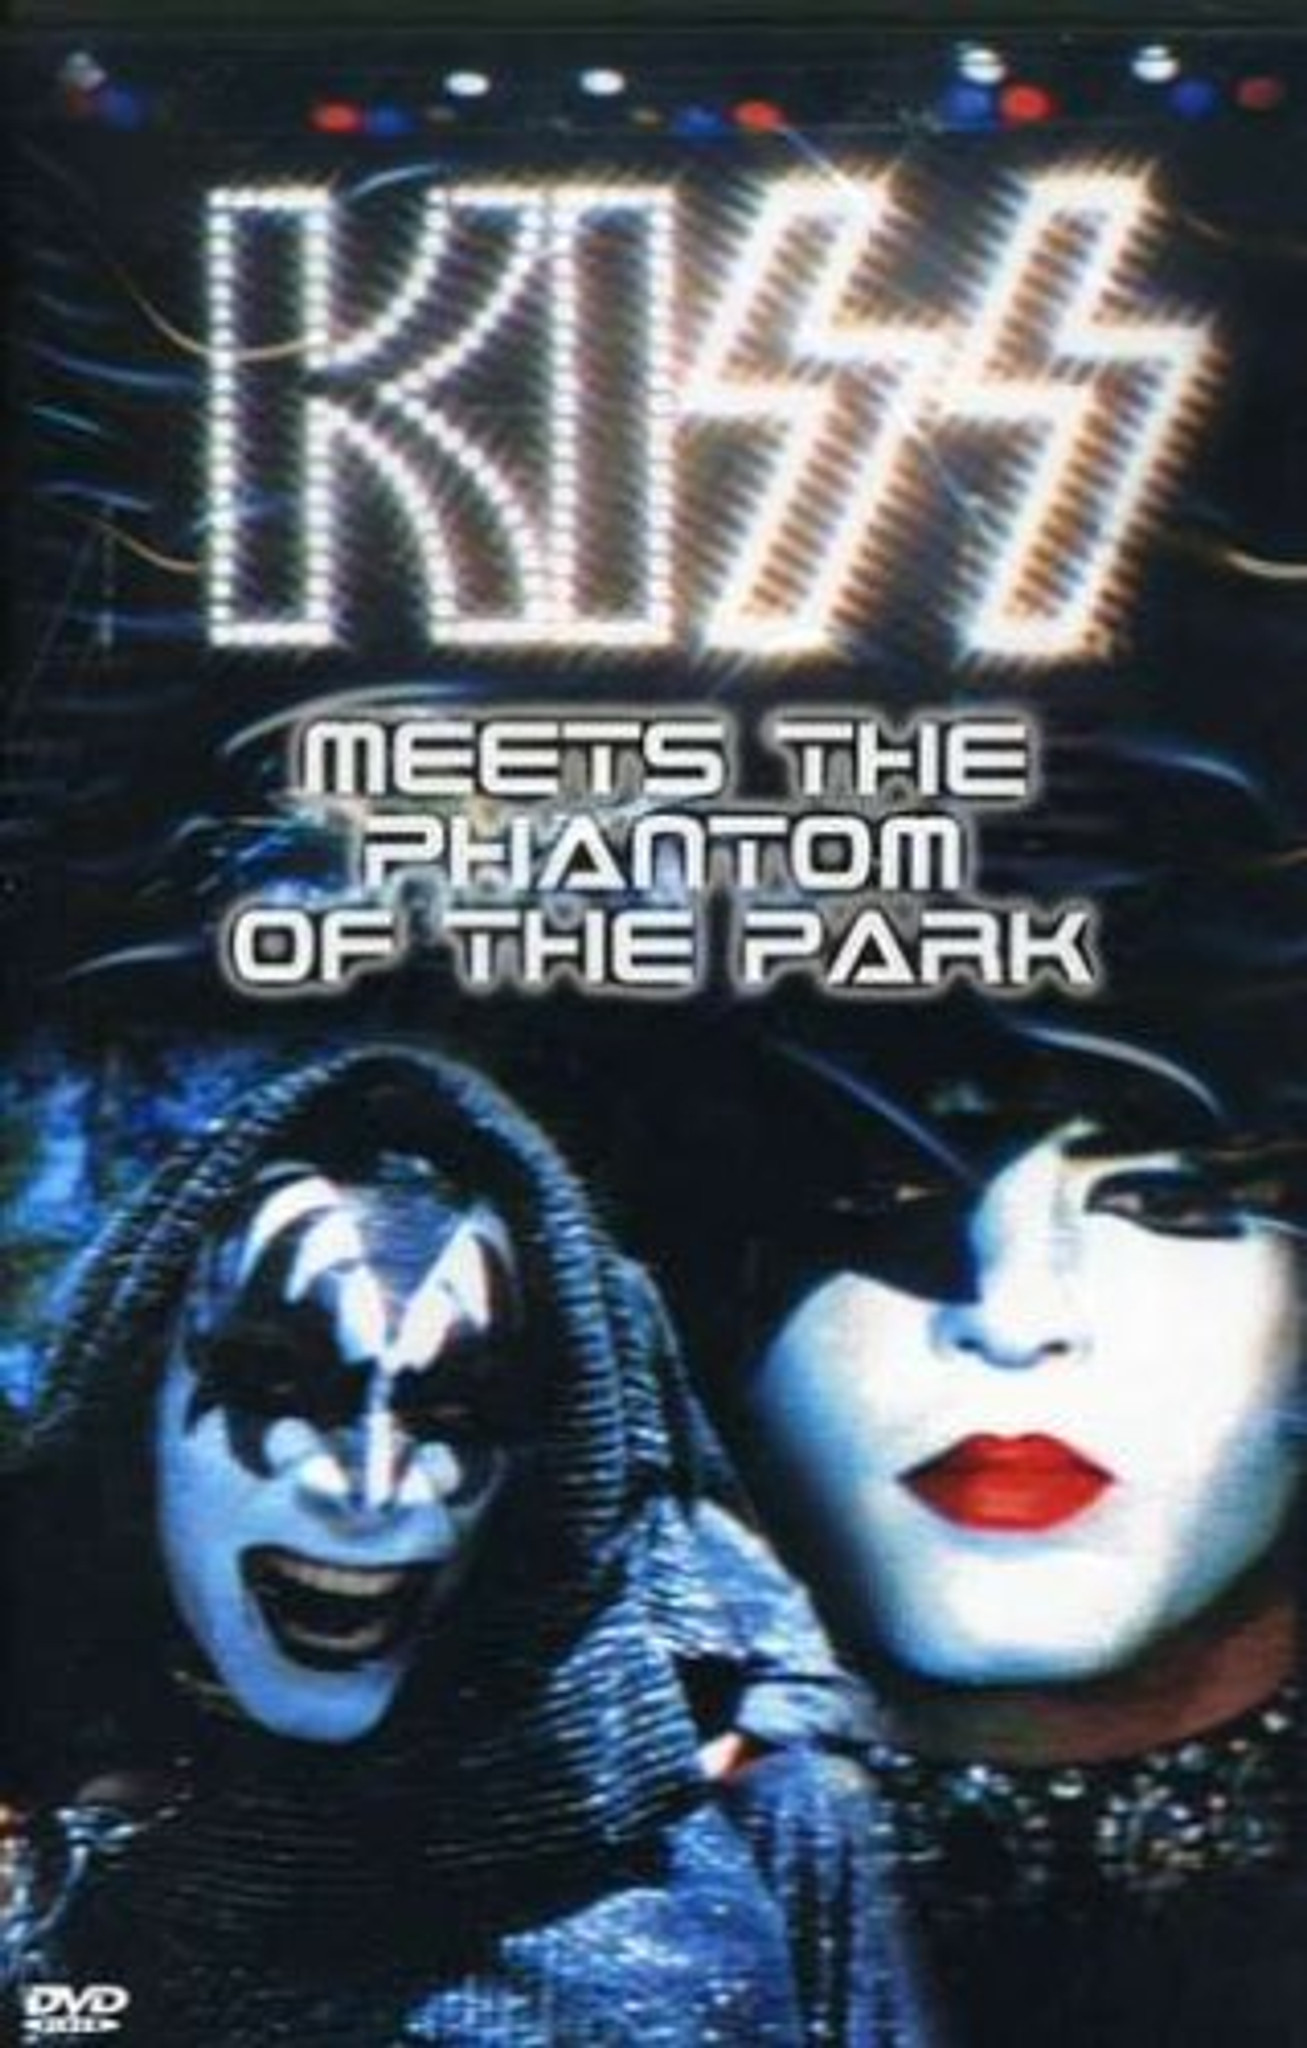 Kiss Meets the Phantom of the Park 1978 DVD, Attack of the Phantoms